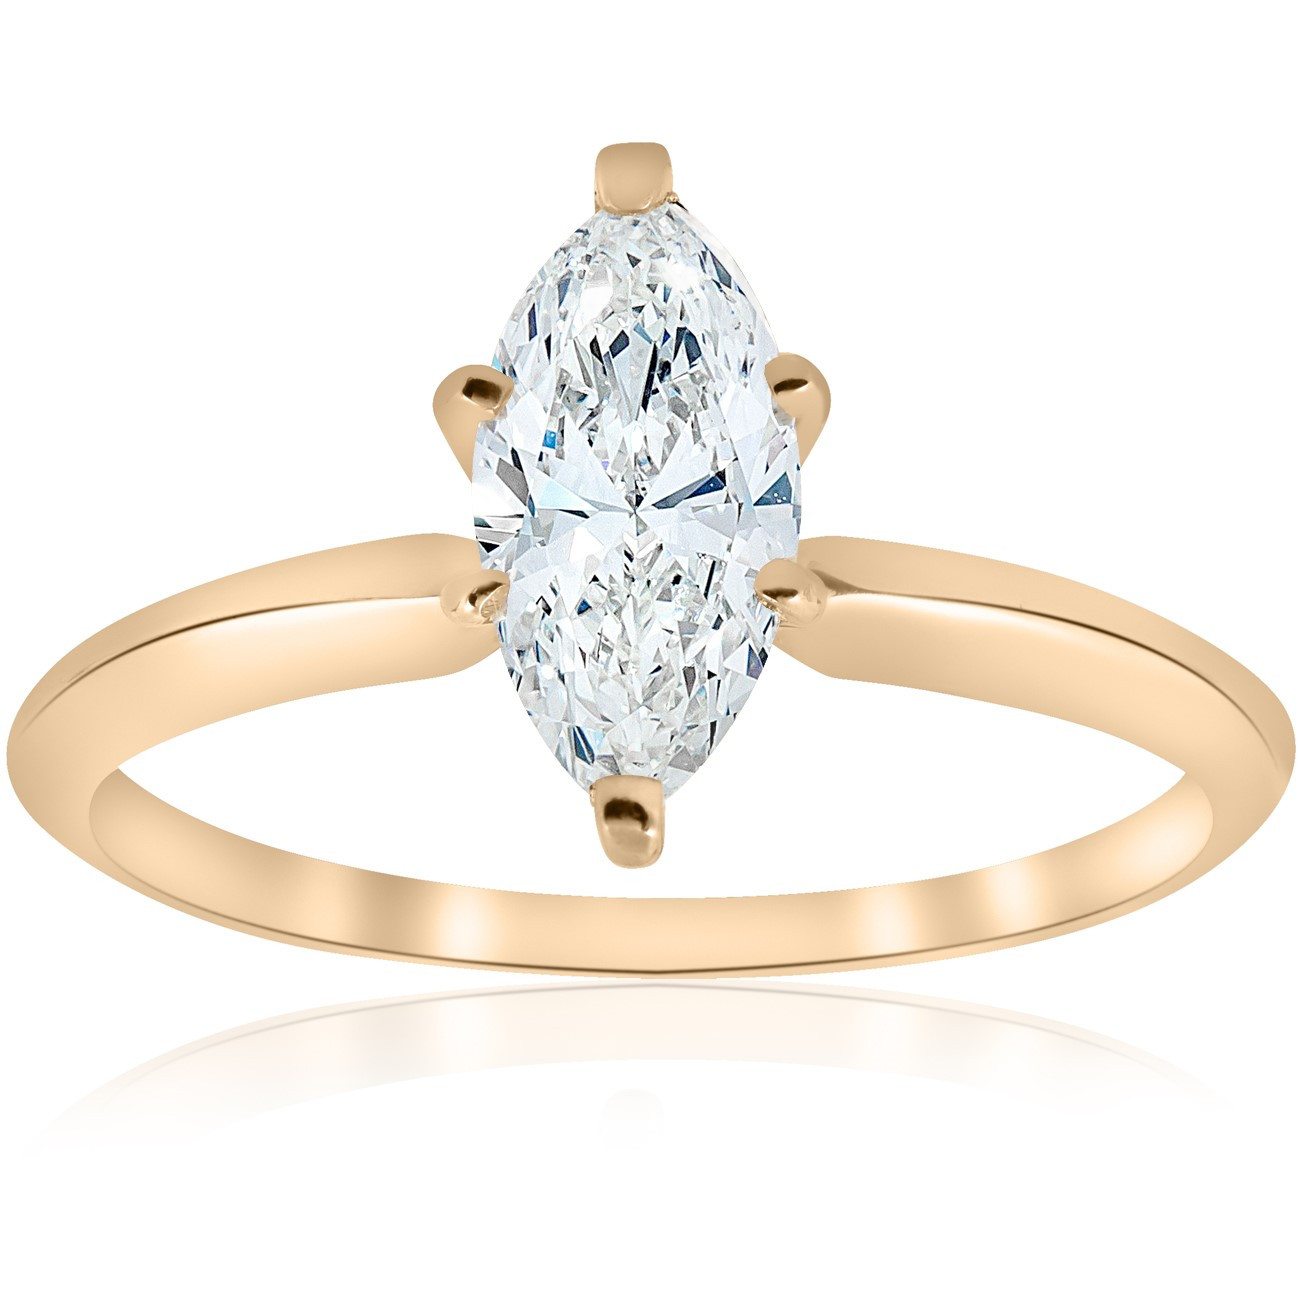 Marquise Cut Diamond Engagement Ring
 Real 1 00CT Marquise Fancy Cut Diamond Solitaire